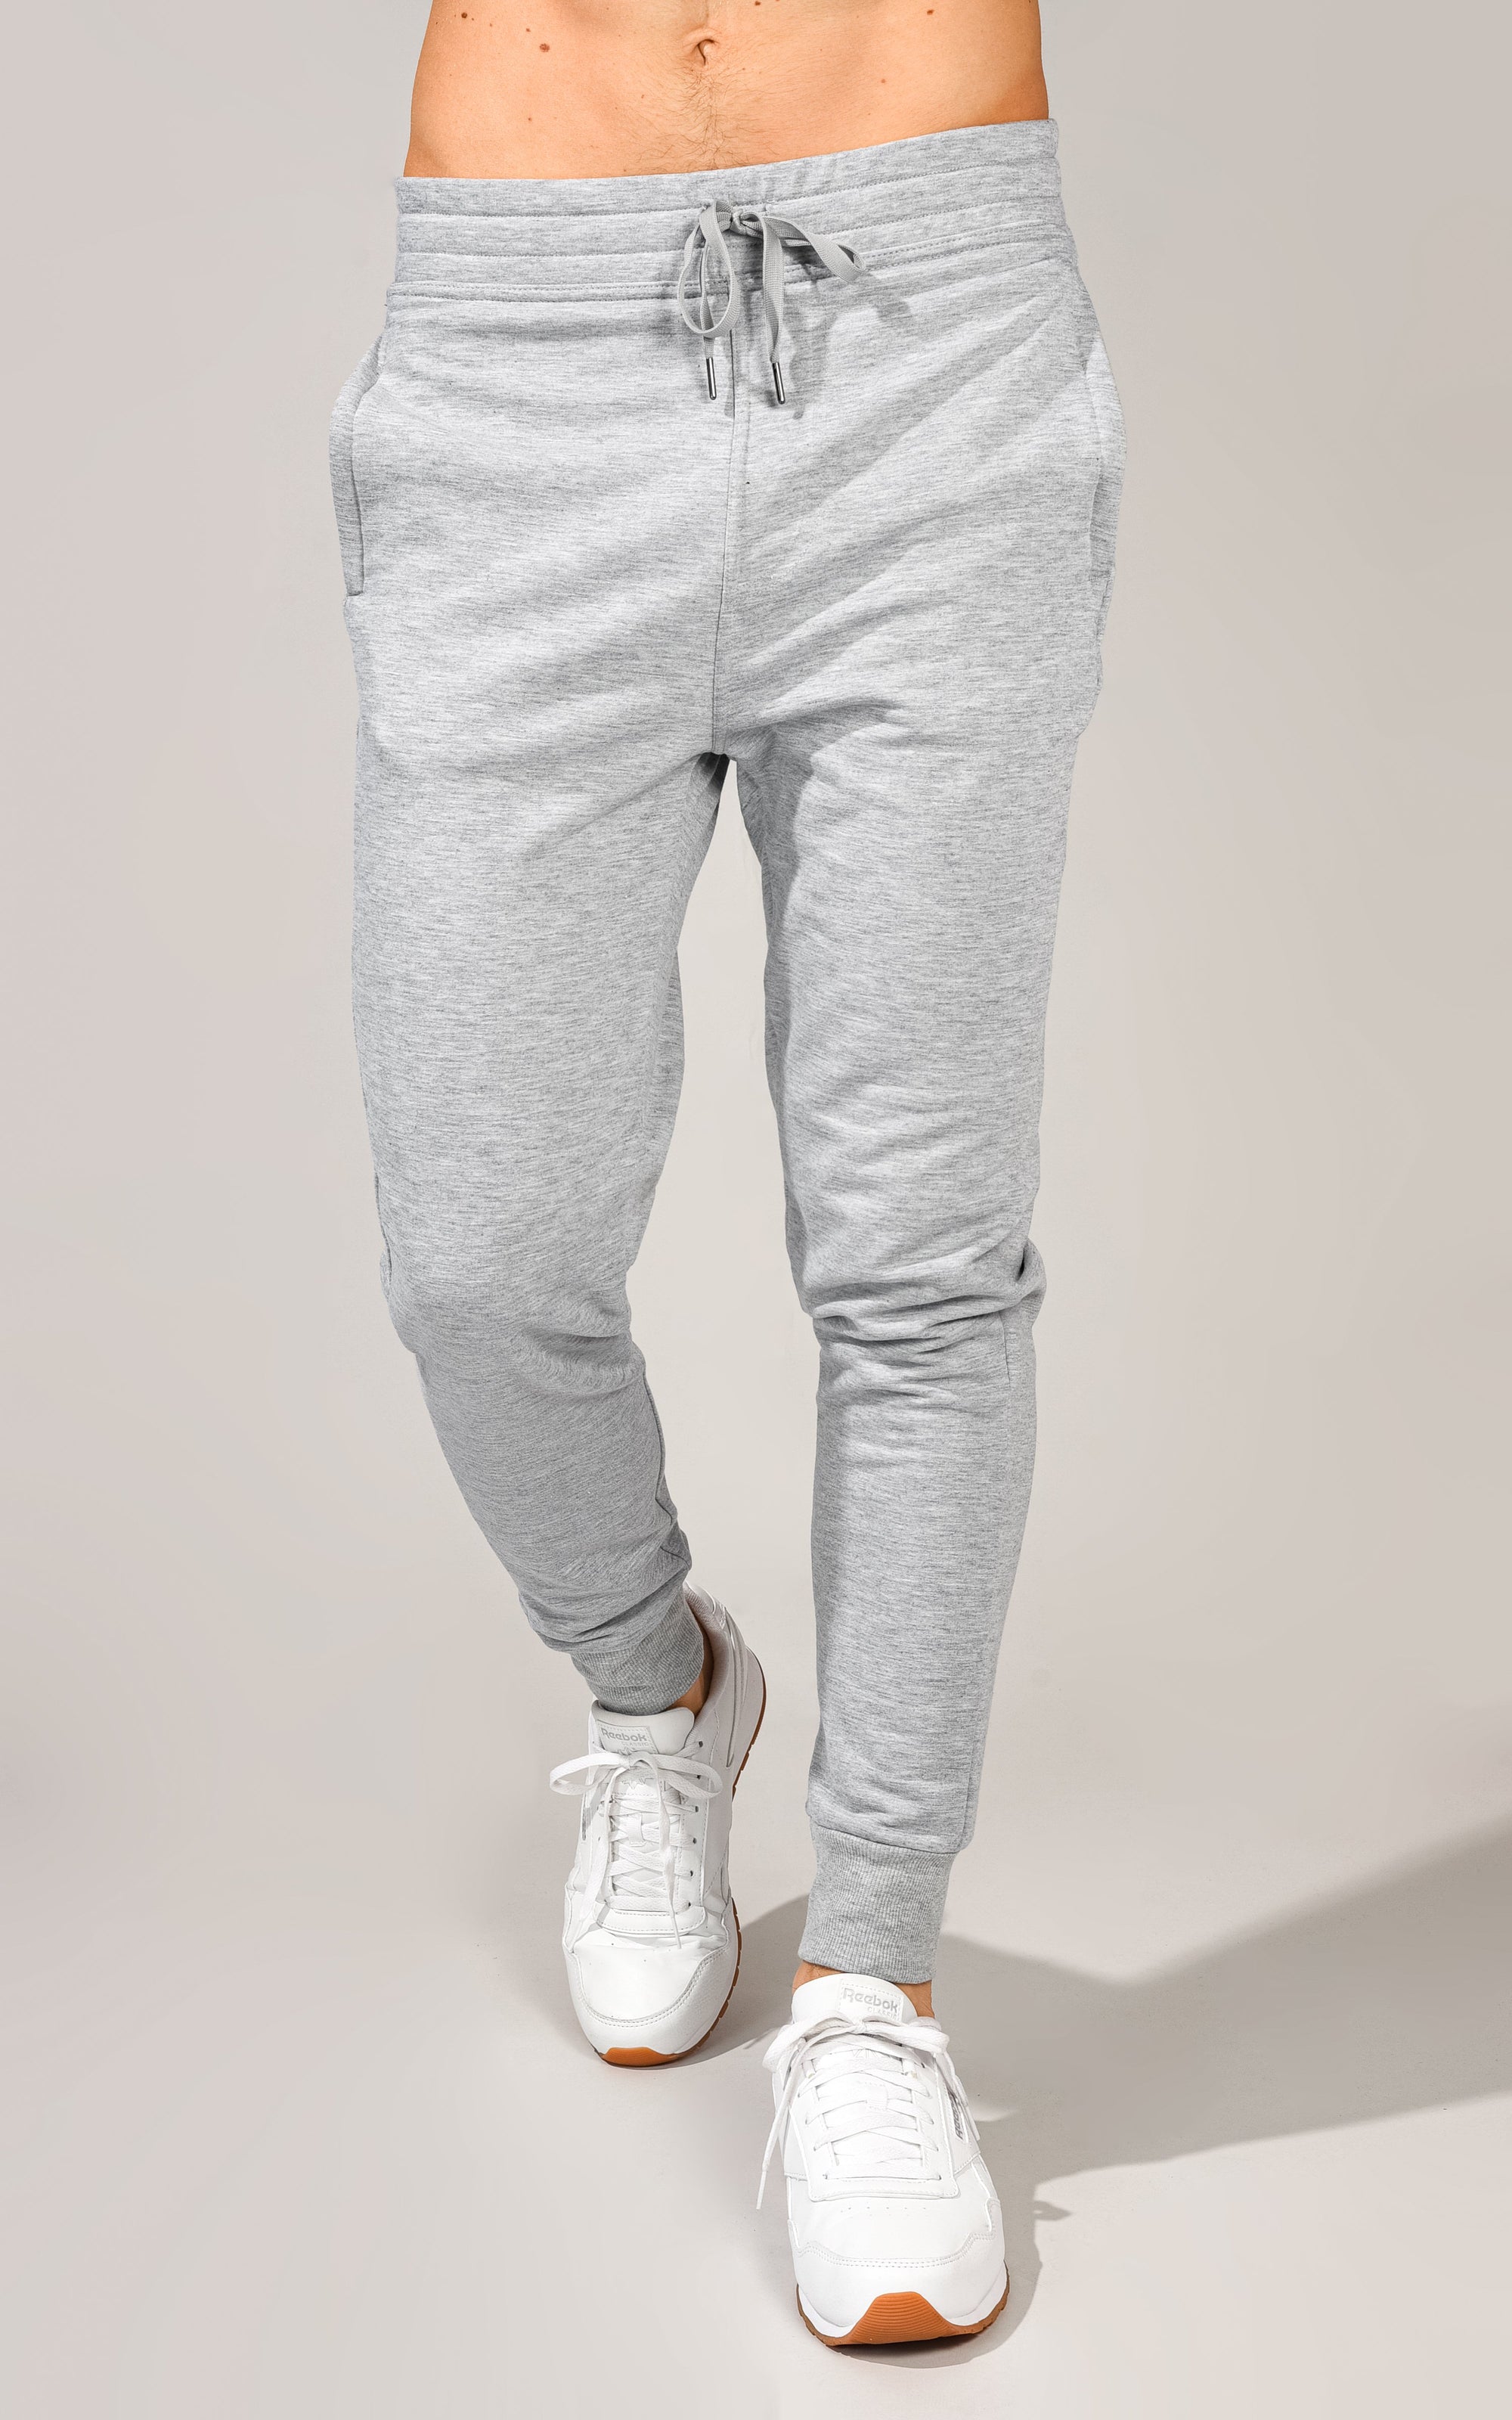 90 Degree By Reflex, Pants, 9 Degree By Reflex Mens Heathered Jogger In  Greycharcoal